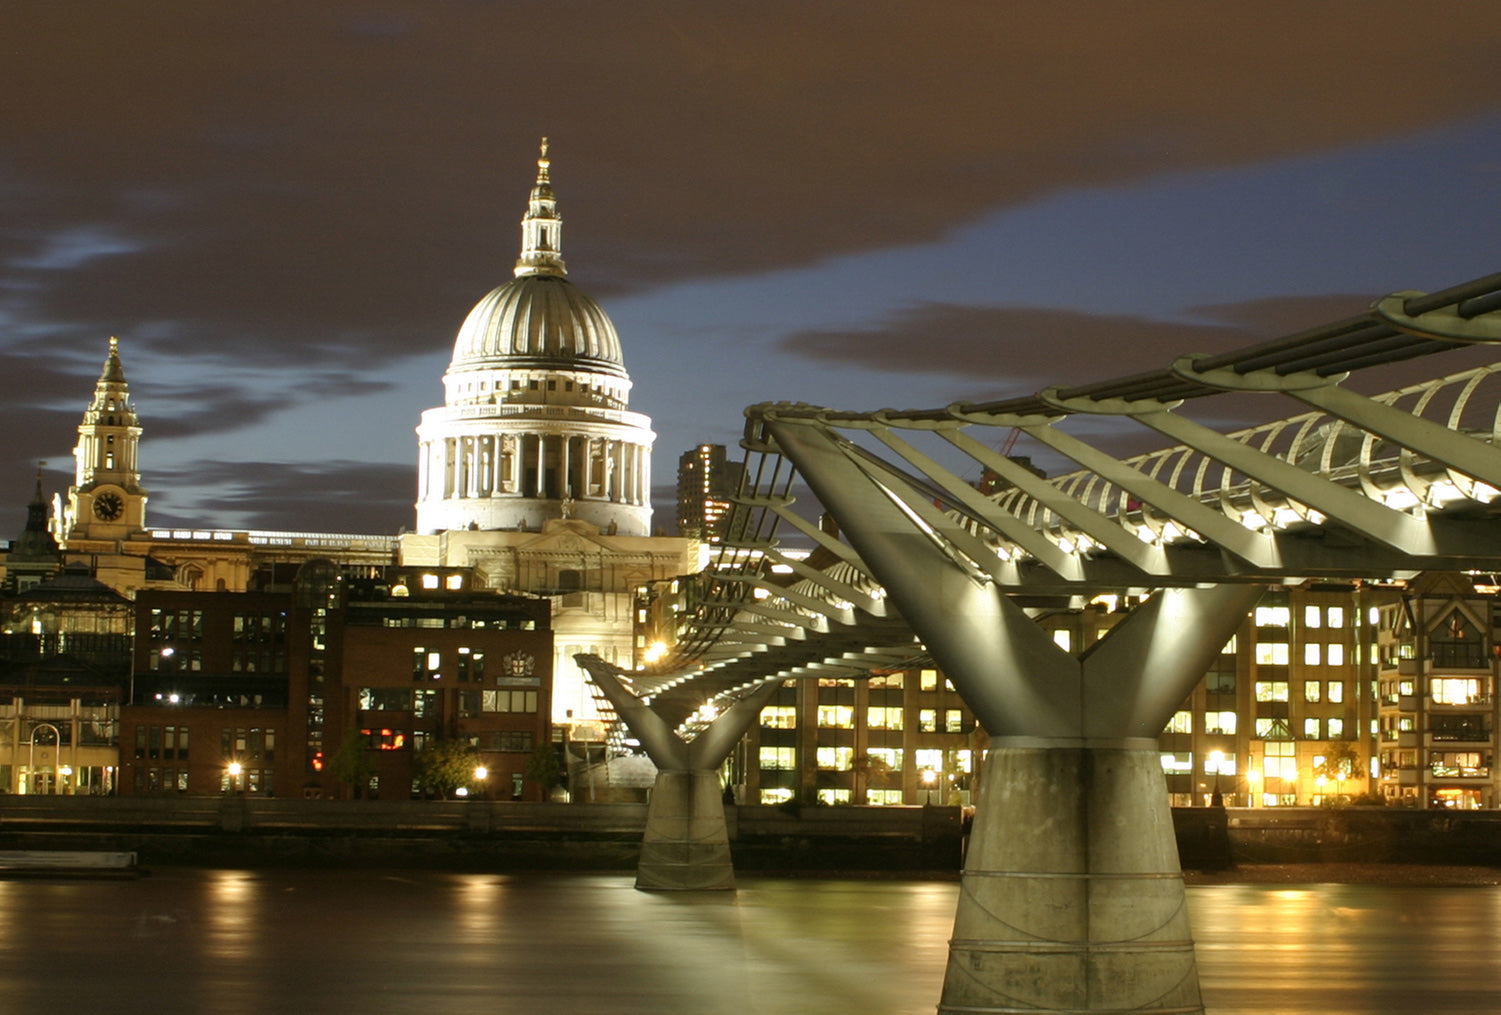 Viewed from The Tate Modern, the Millennium Bridge leads to an illuminated St Pauls Cathedral and London skyline.